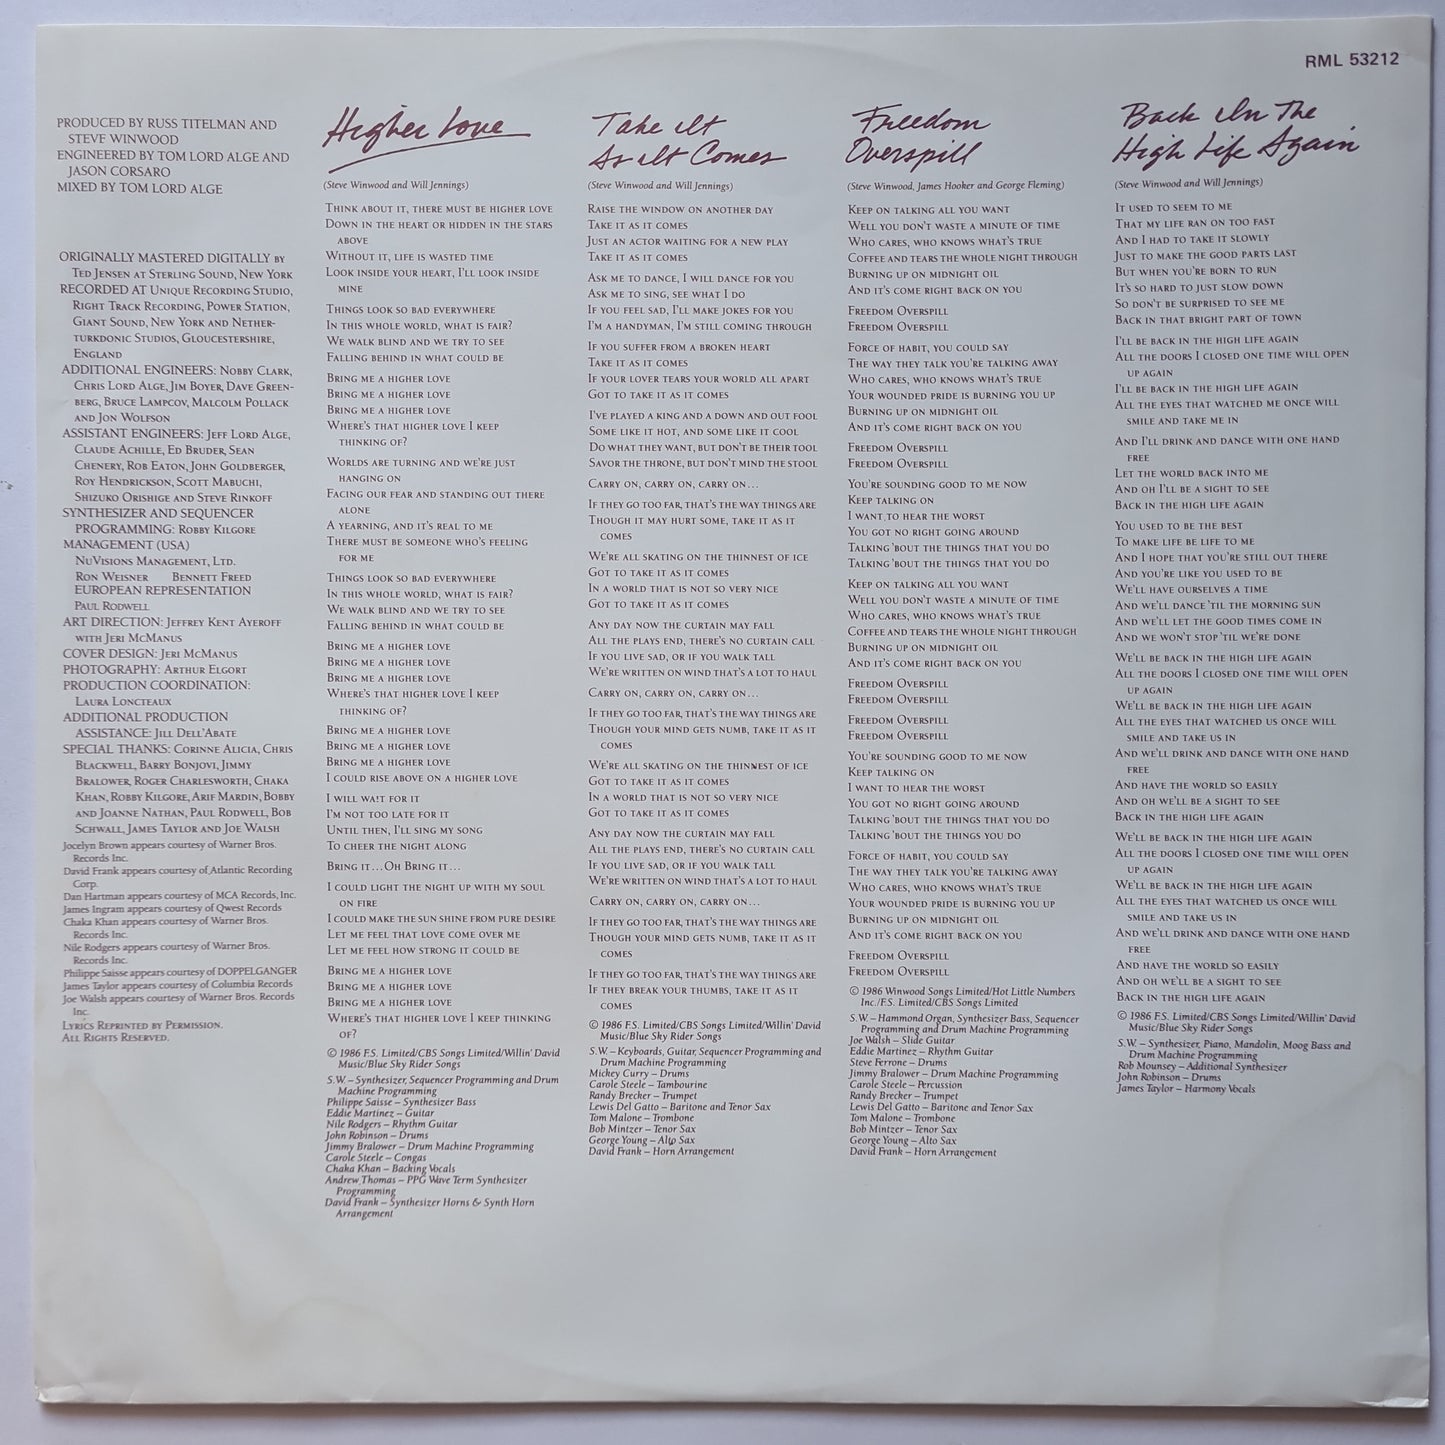 Stevie Winwood – Back In The High Life - 1986 - Vinyl Record